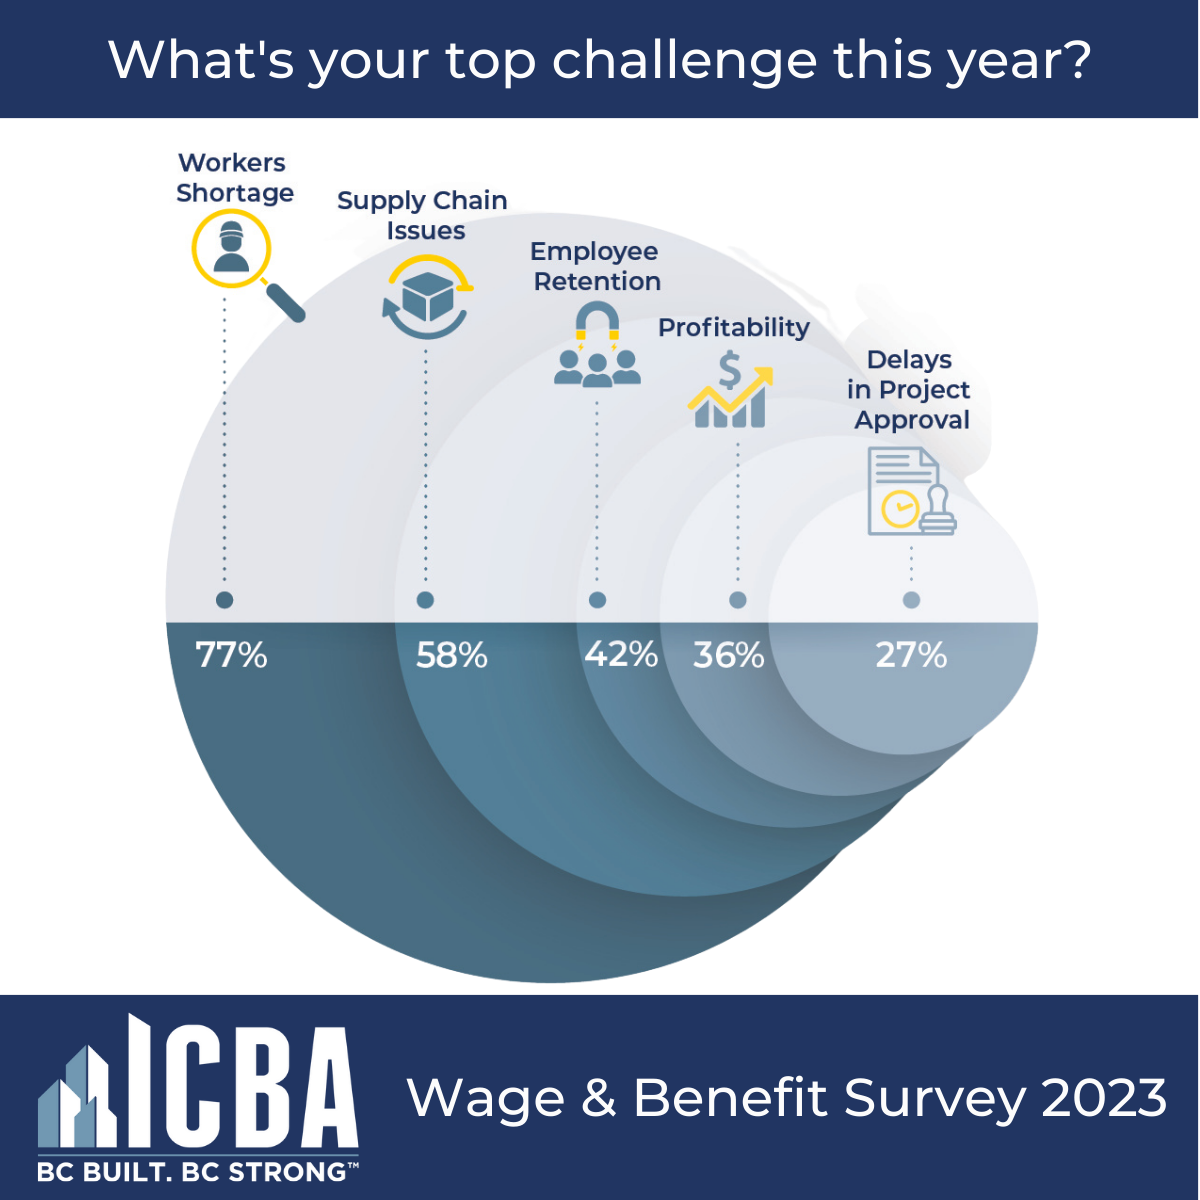 NEWS RELEASE: Labour Shortages, Higher Wages, and Discontent with Red Tape – BC Construction in 2023